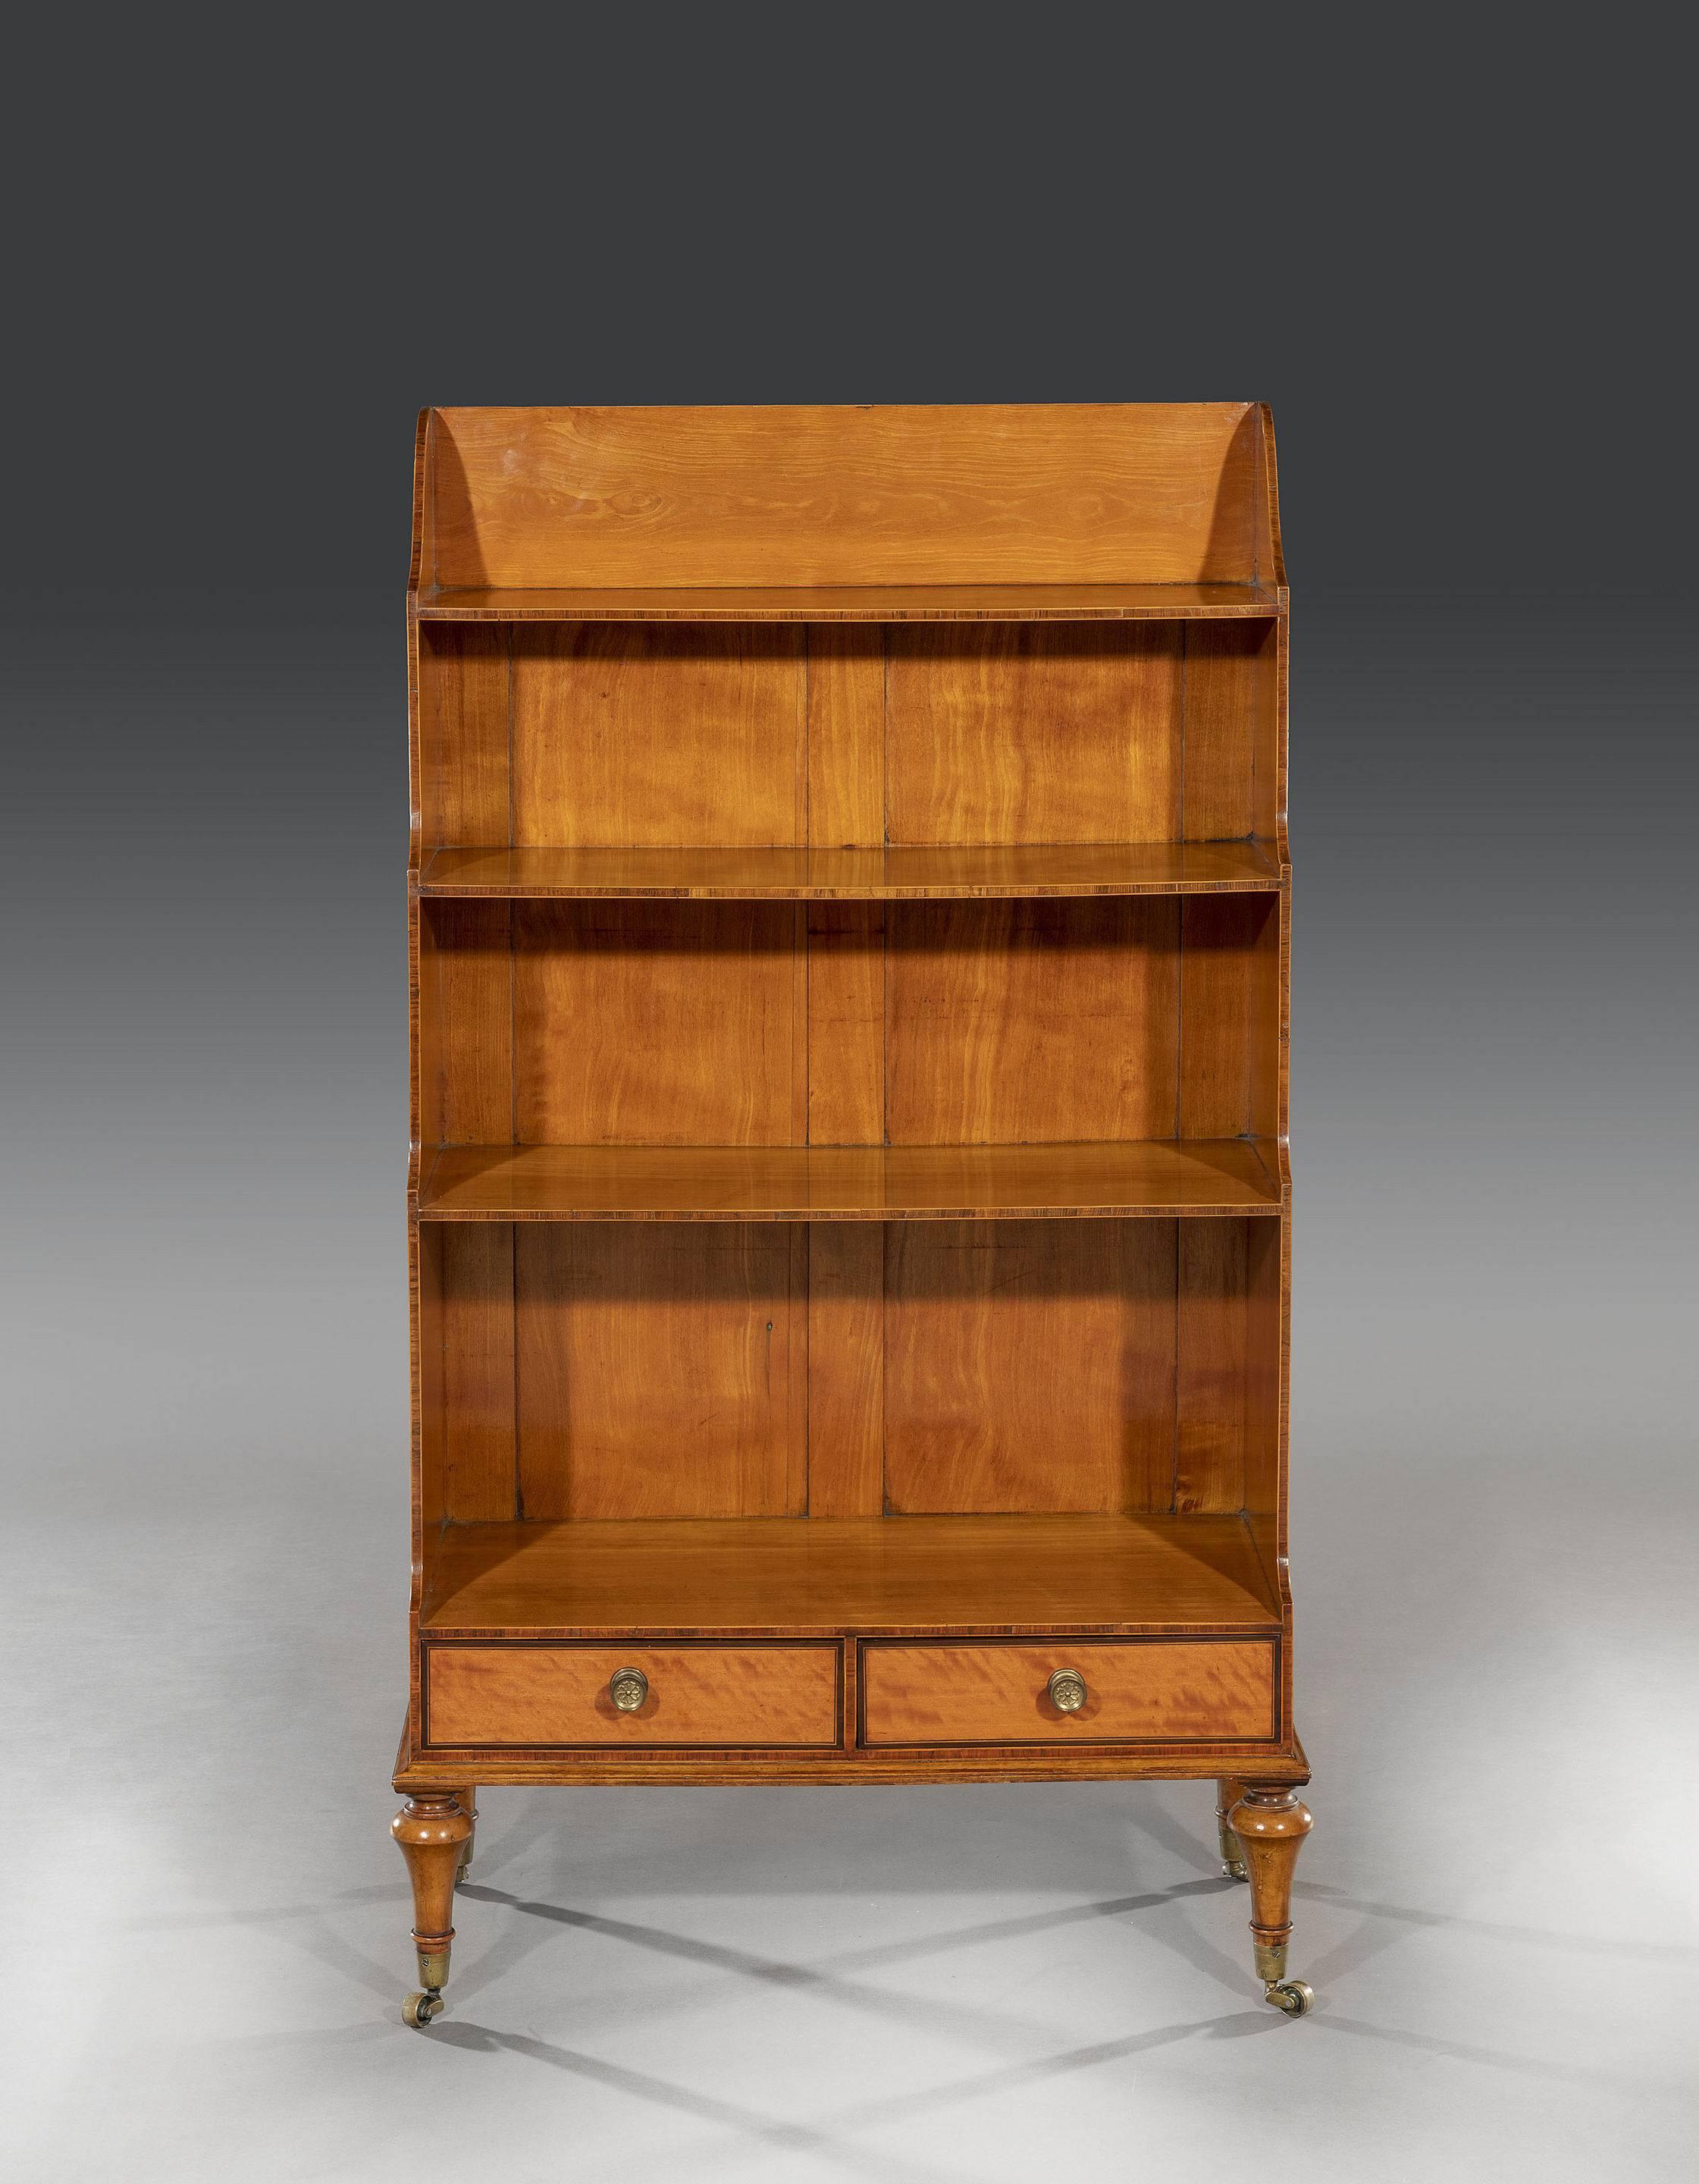 An elegant satinwood waterfall bookcase with veneered backboards and solid sides with kingwood cross banding through out. The graduated shelves sit above two drawers that retain the original brass handles and purple heart cross banding above solid